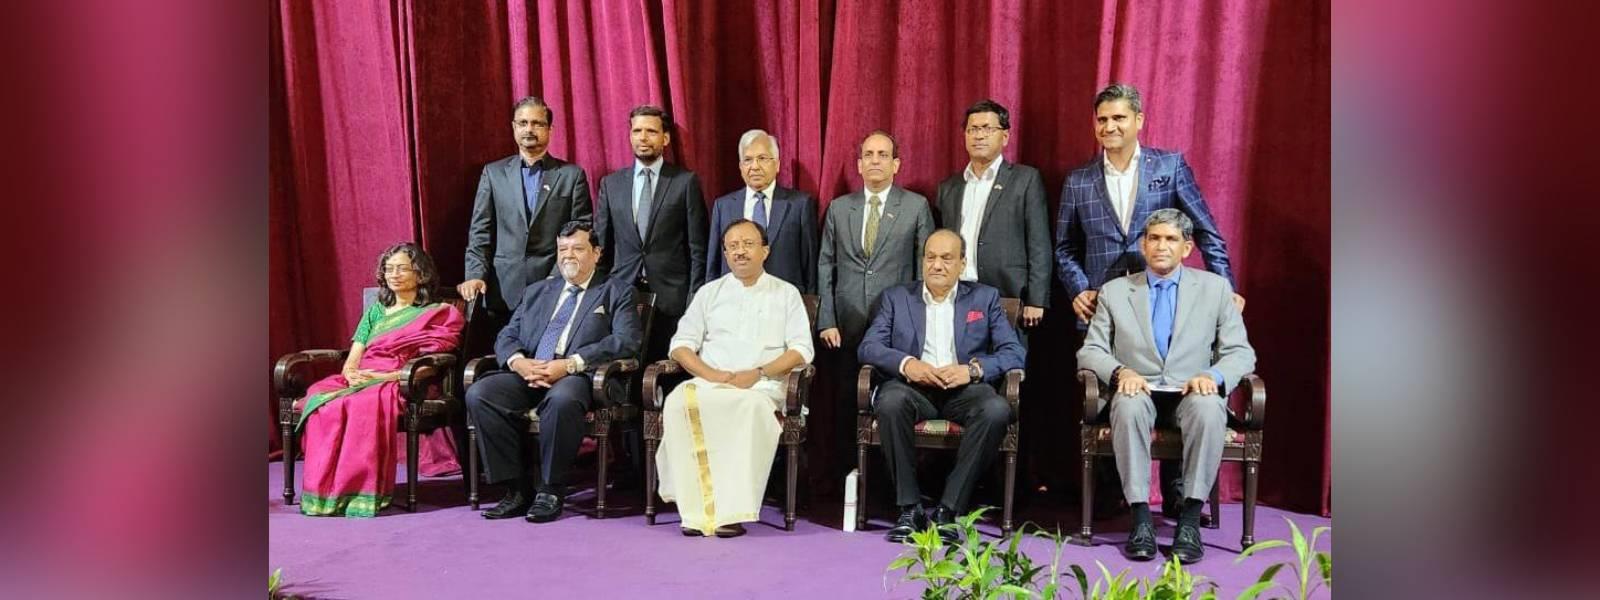 Minister of State for External Affairs Shri V. Muraleedharan interacted with Business leaders led by Consortium of Indian Industries in Malaysia & Malaysia-India Business Council, in Kuala Lumpur